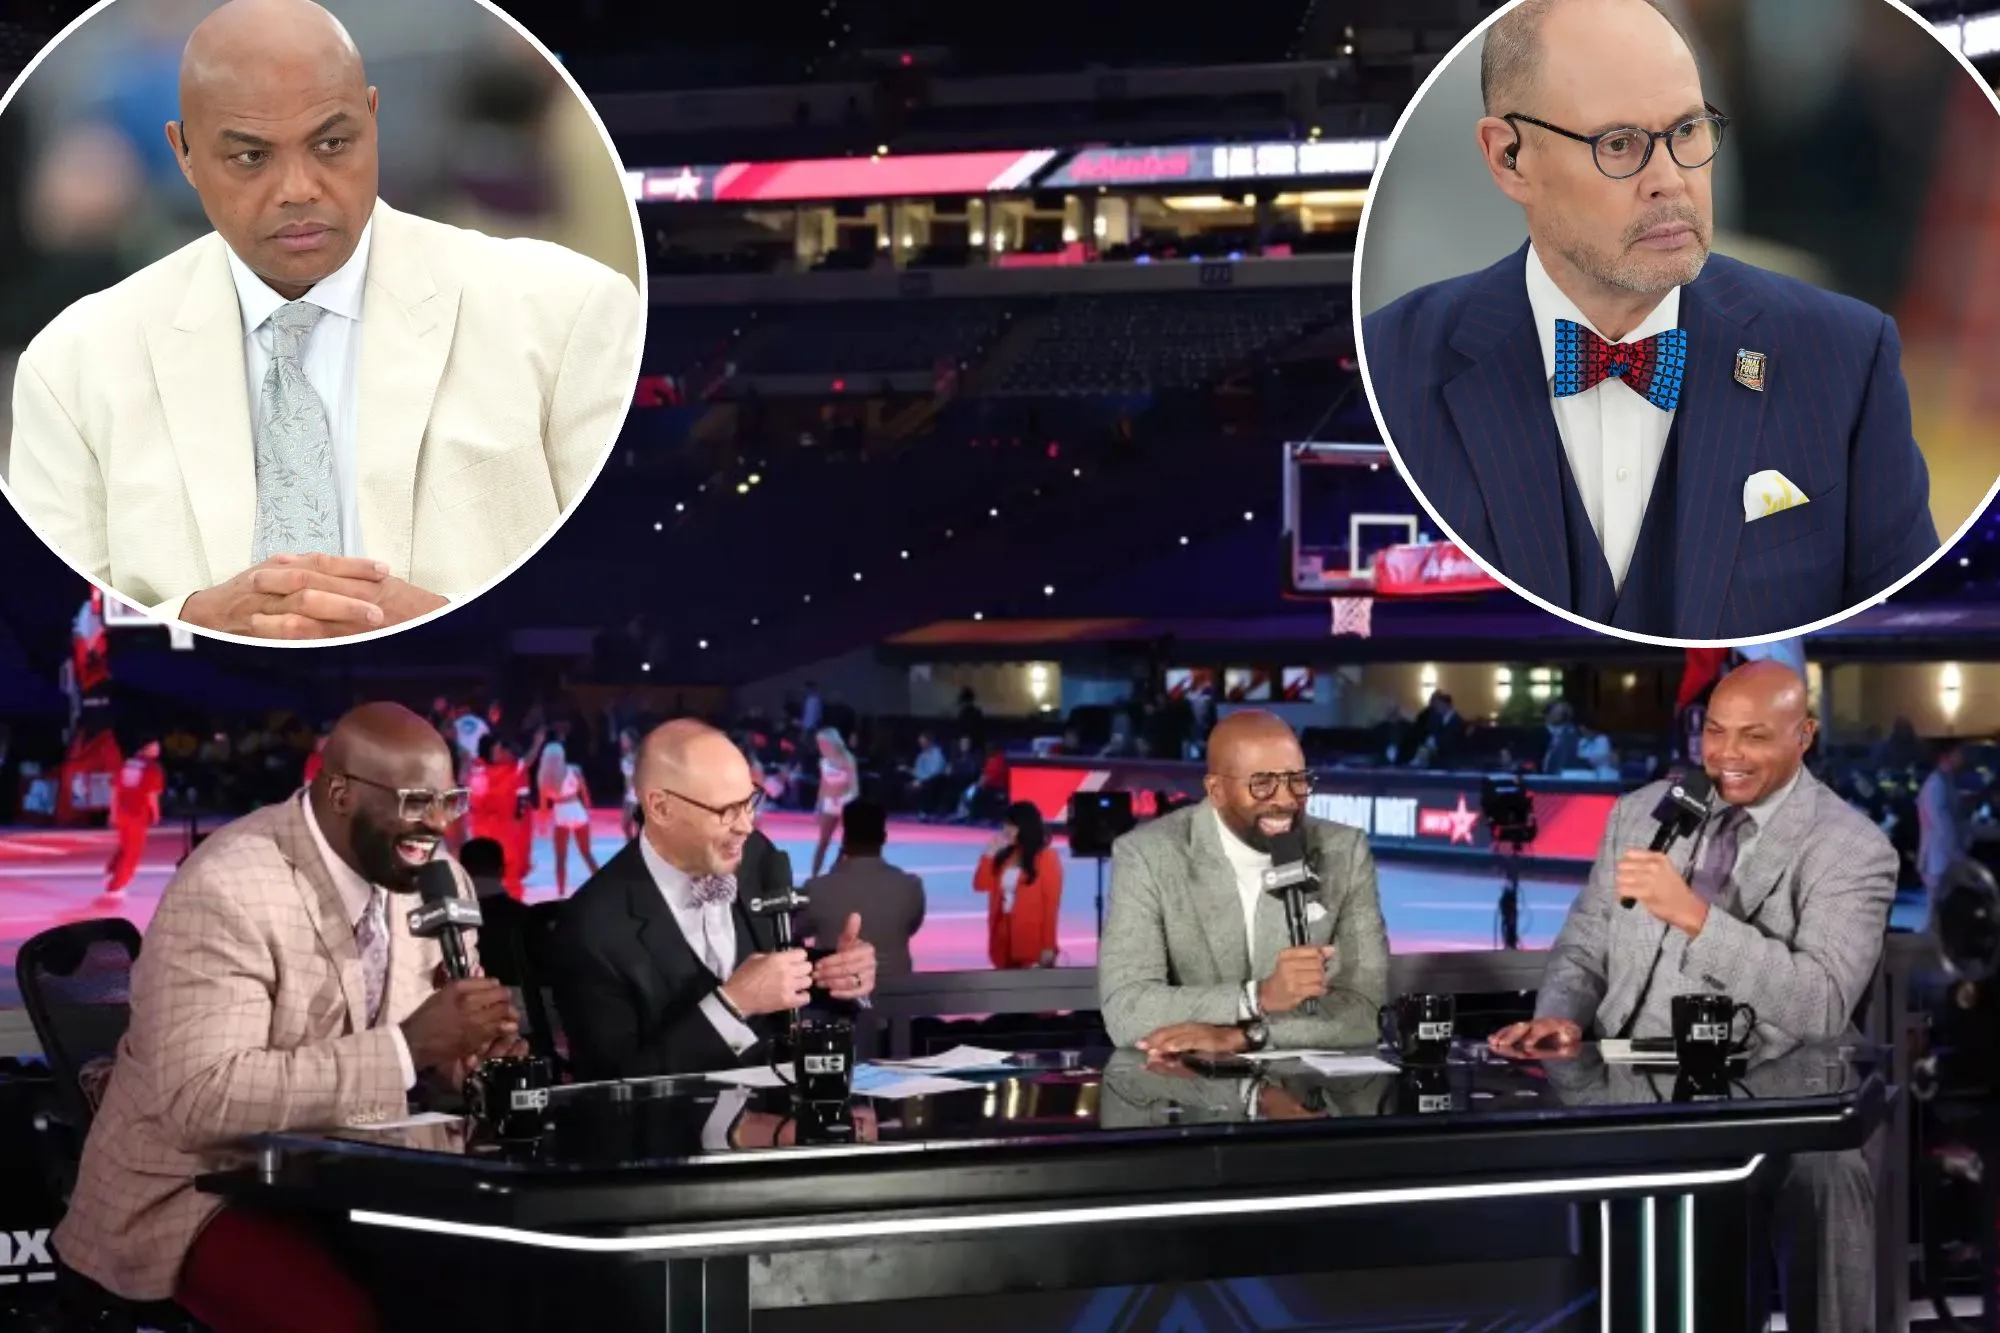 Ernie Johnson scolds reporter, Kenny Smith argues with Charles Barkley in behind-the-scenes drama at TNT